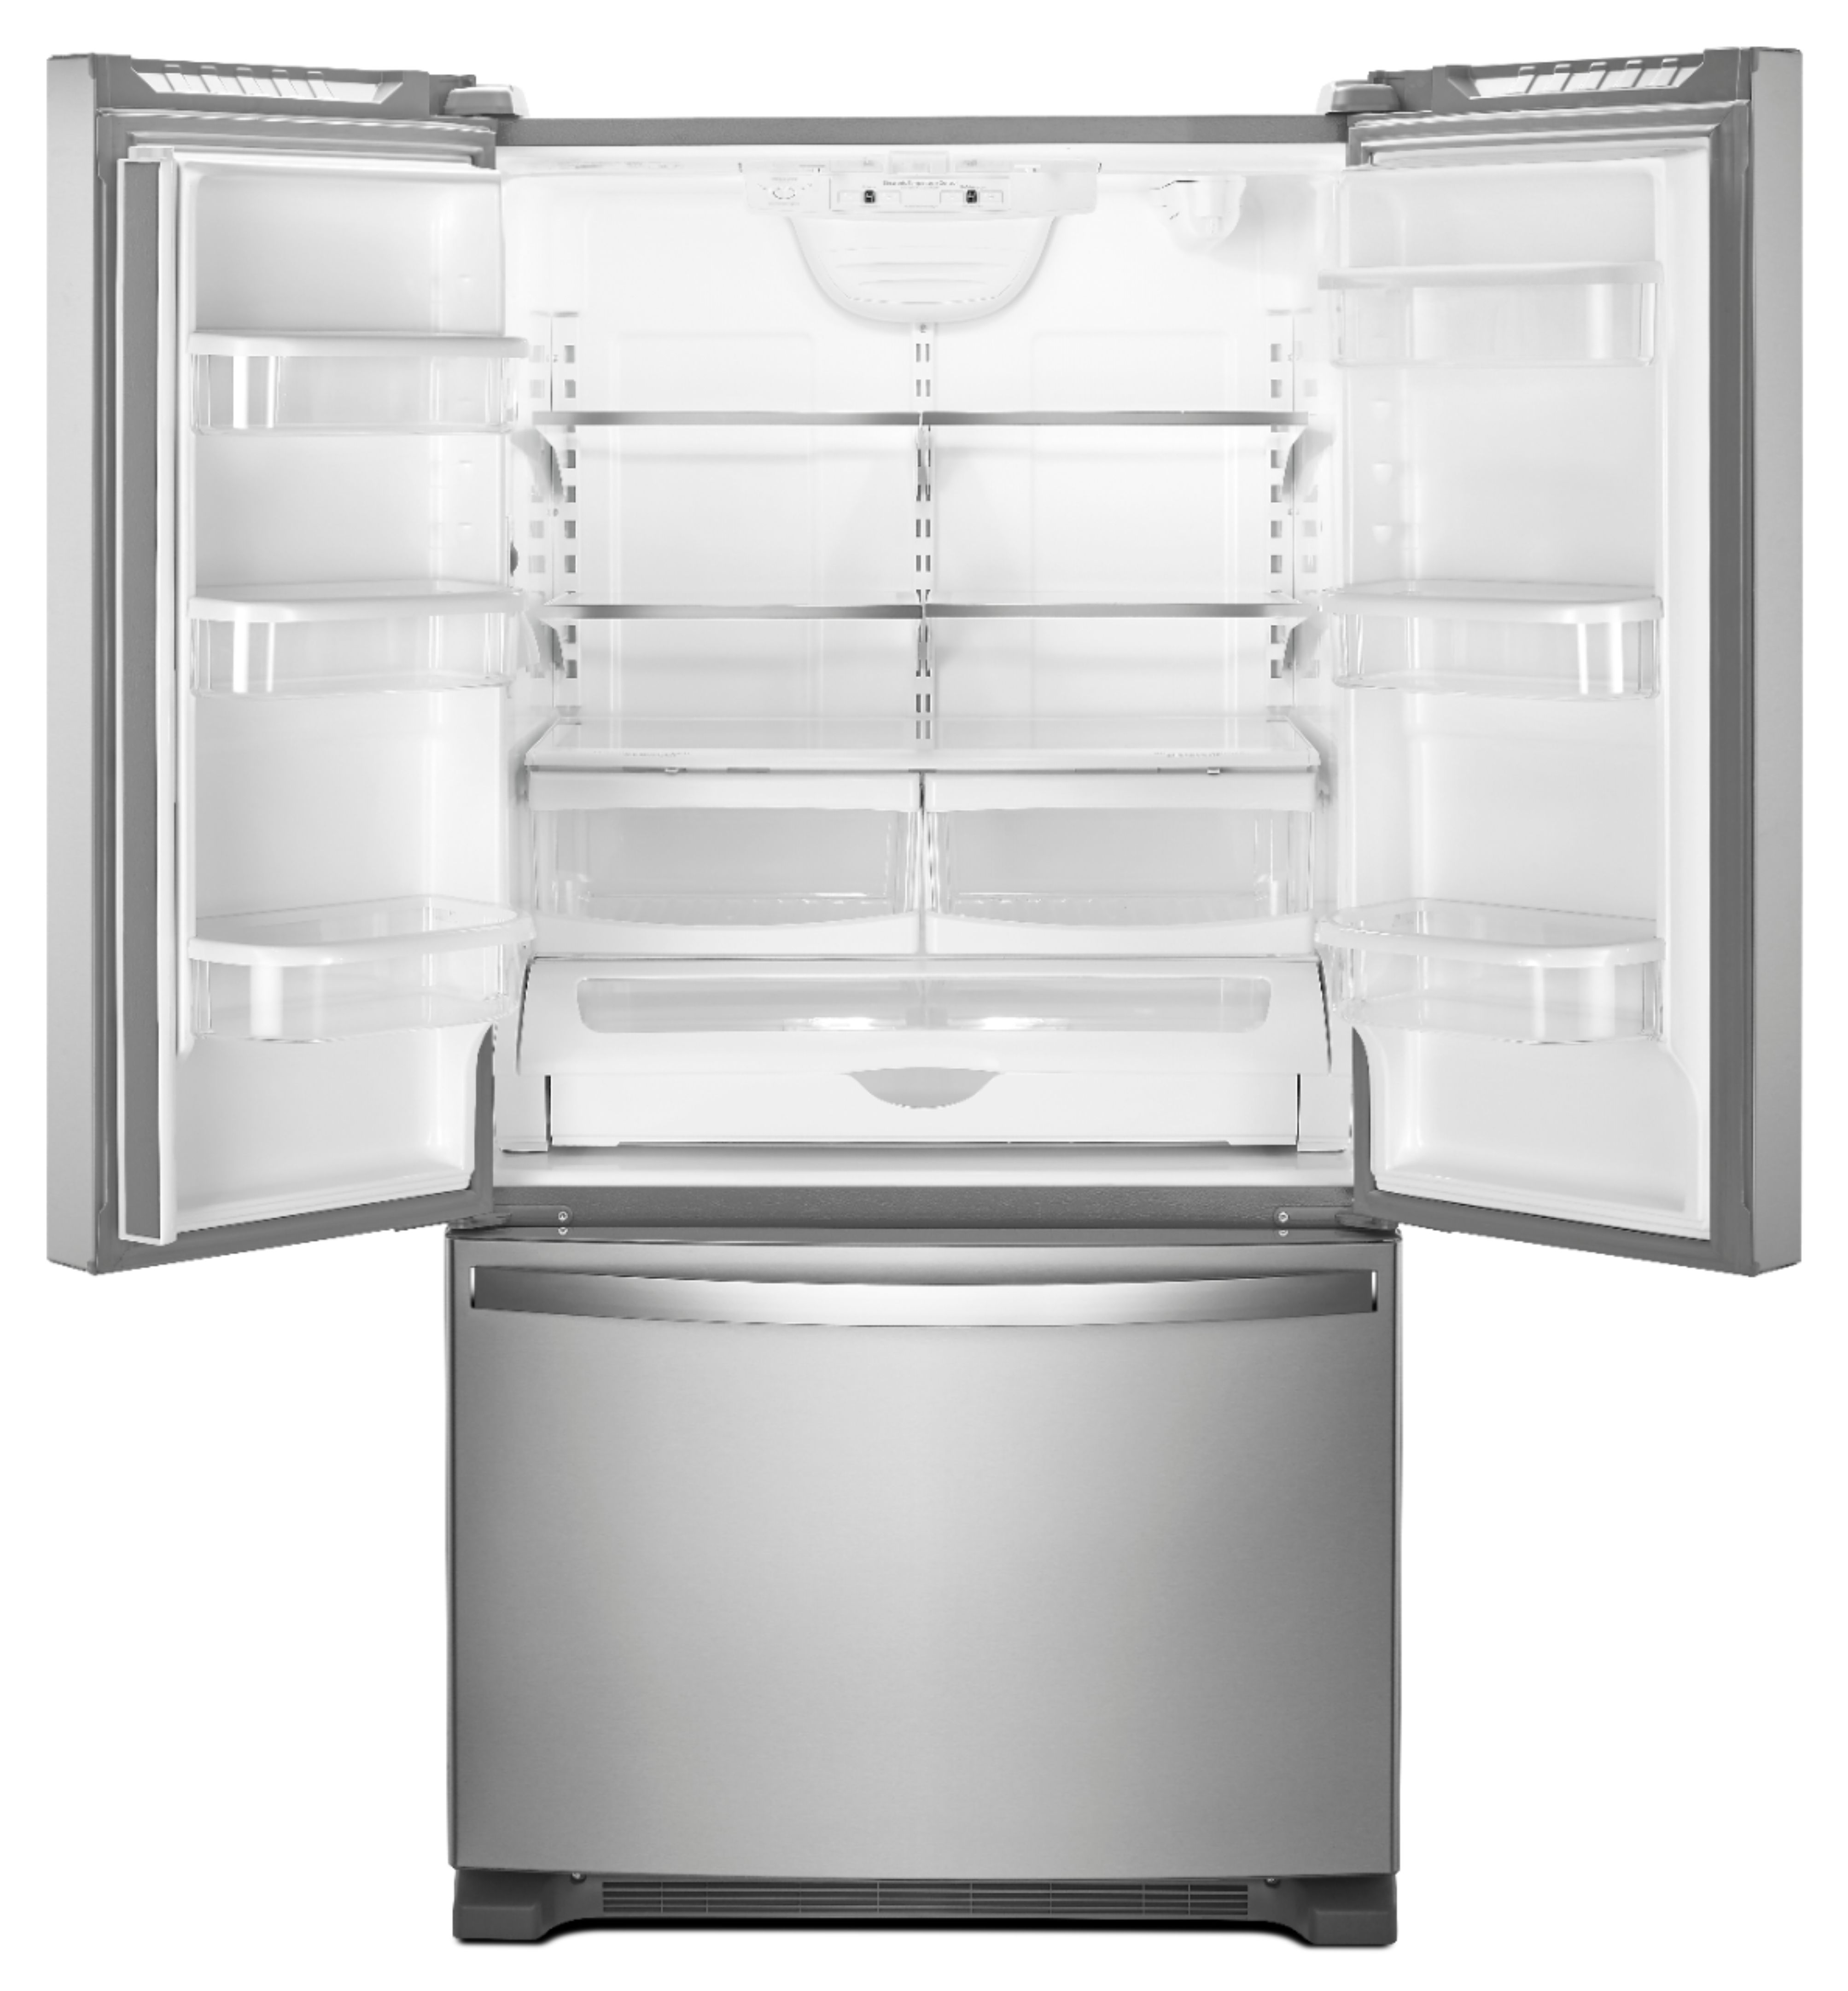 Customer Reviews: Whirlpool 25.2 Cu. Ft. French Door Refrigerator with ...